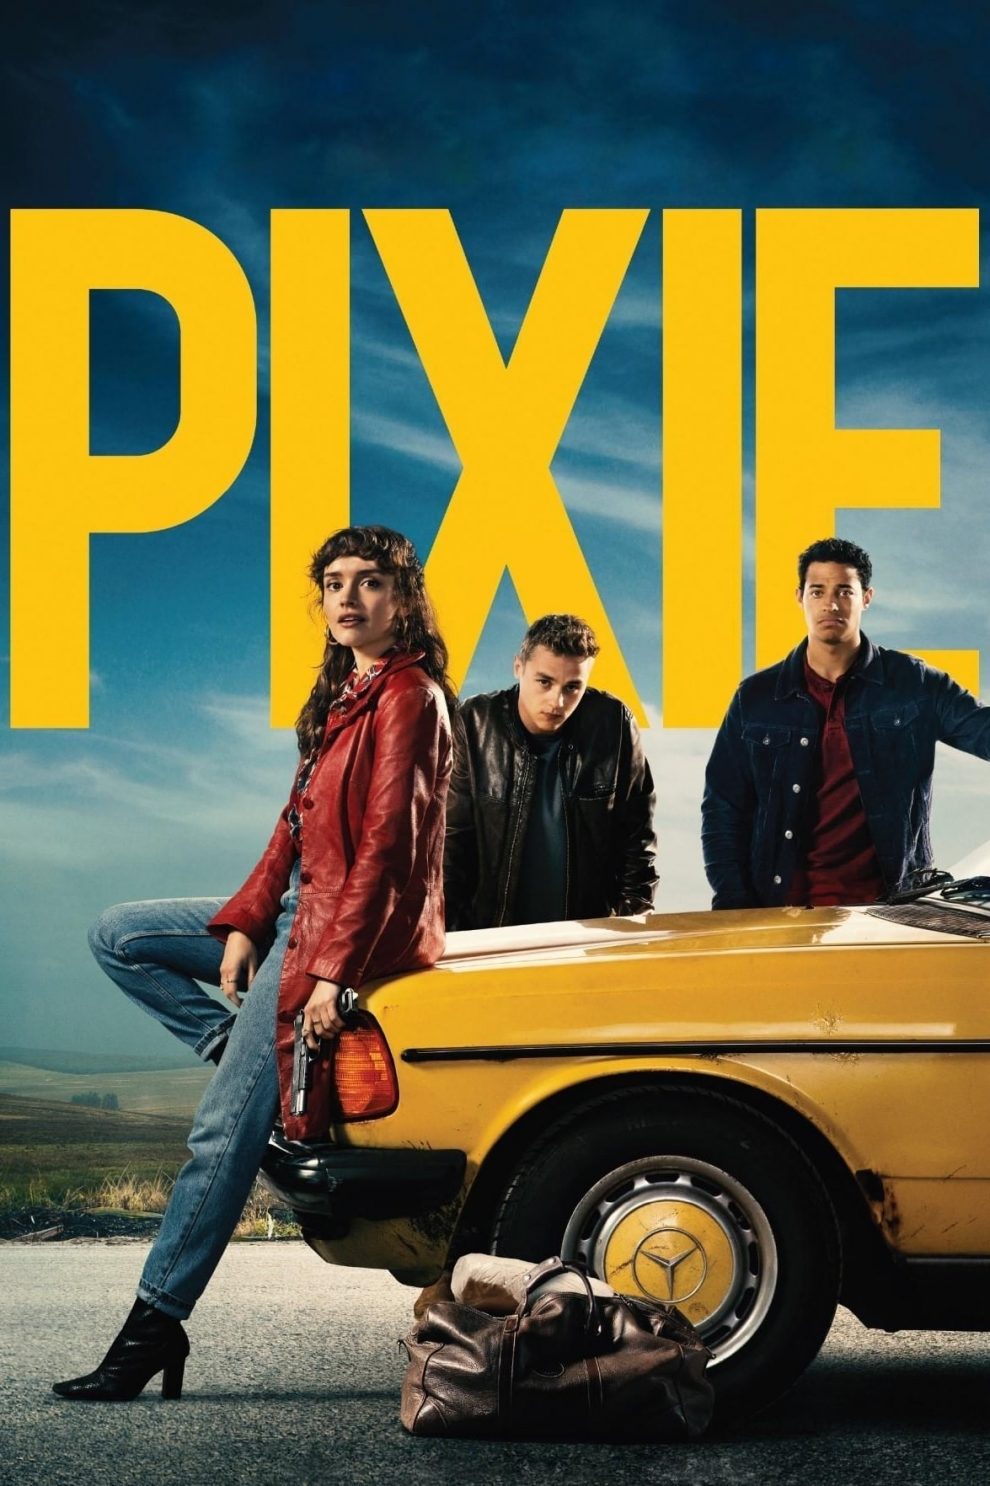 Poster for the movie "Pixie"